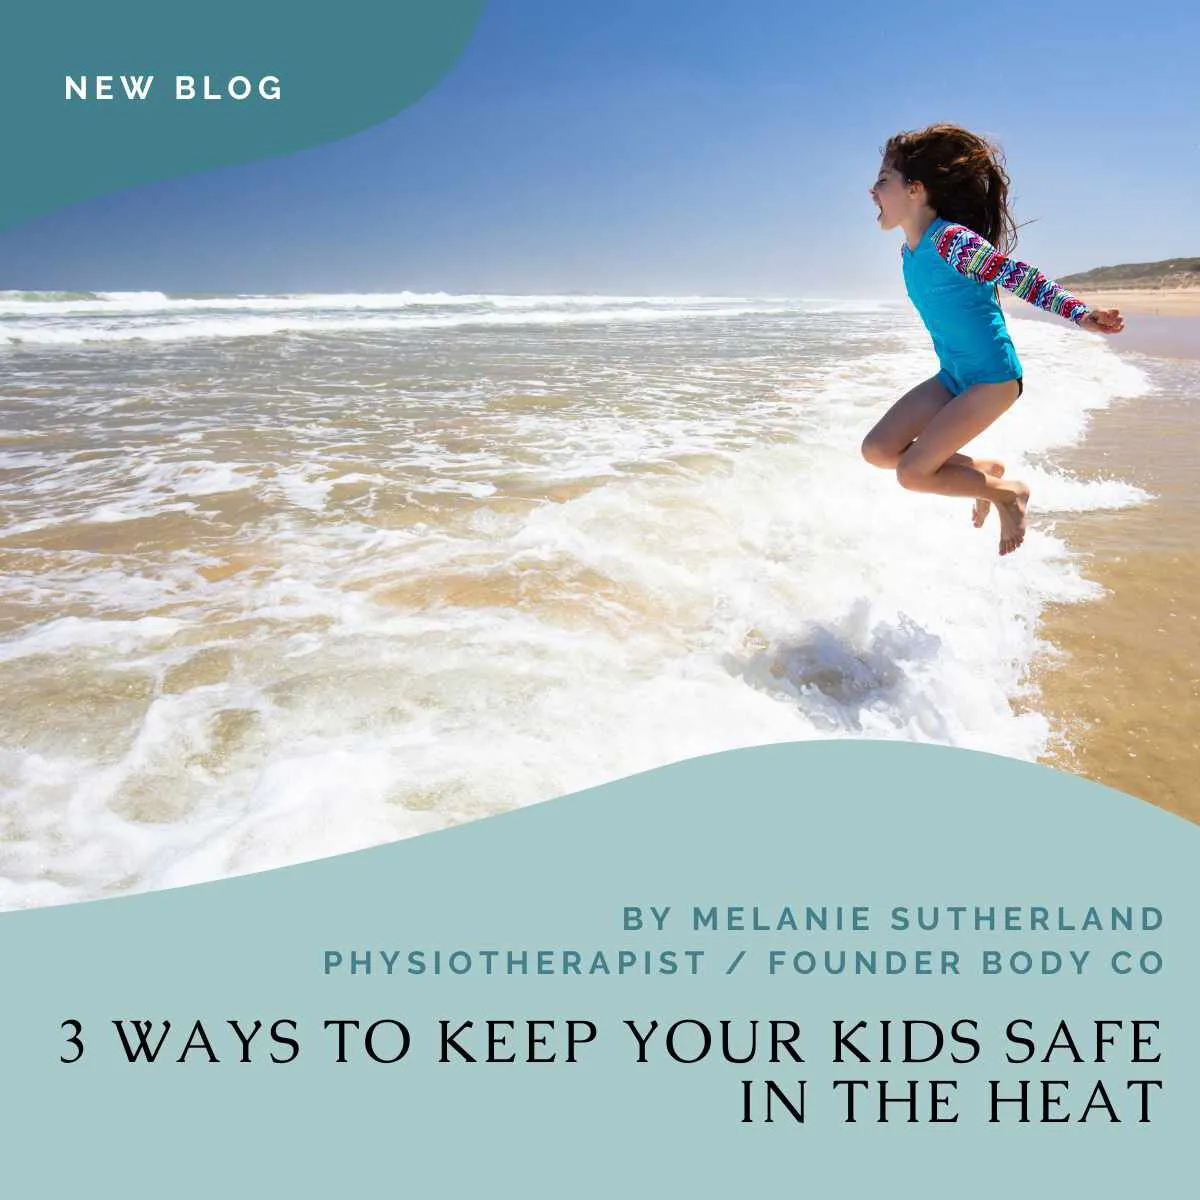 Feeling Hot! Hot! Hot! – How to Keep your Kids Safe in the Heat and Sun.